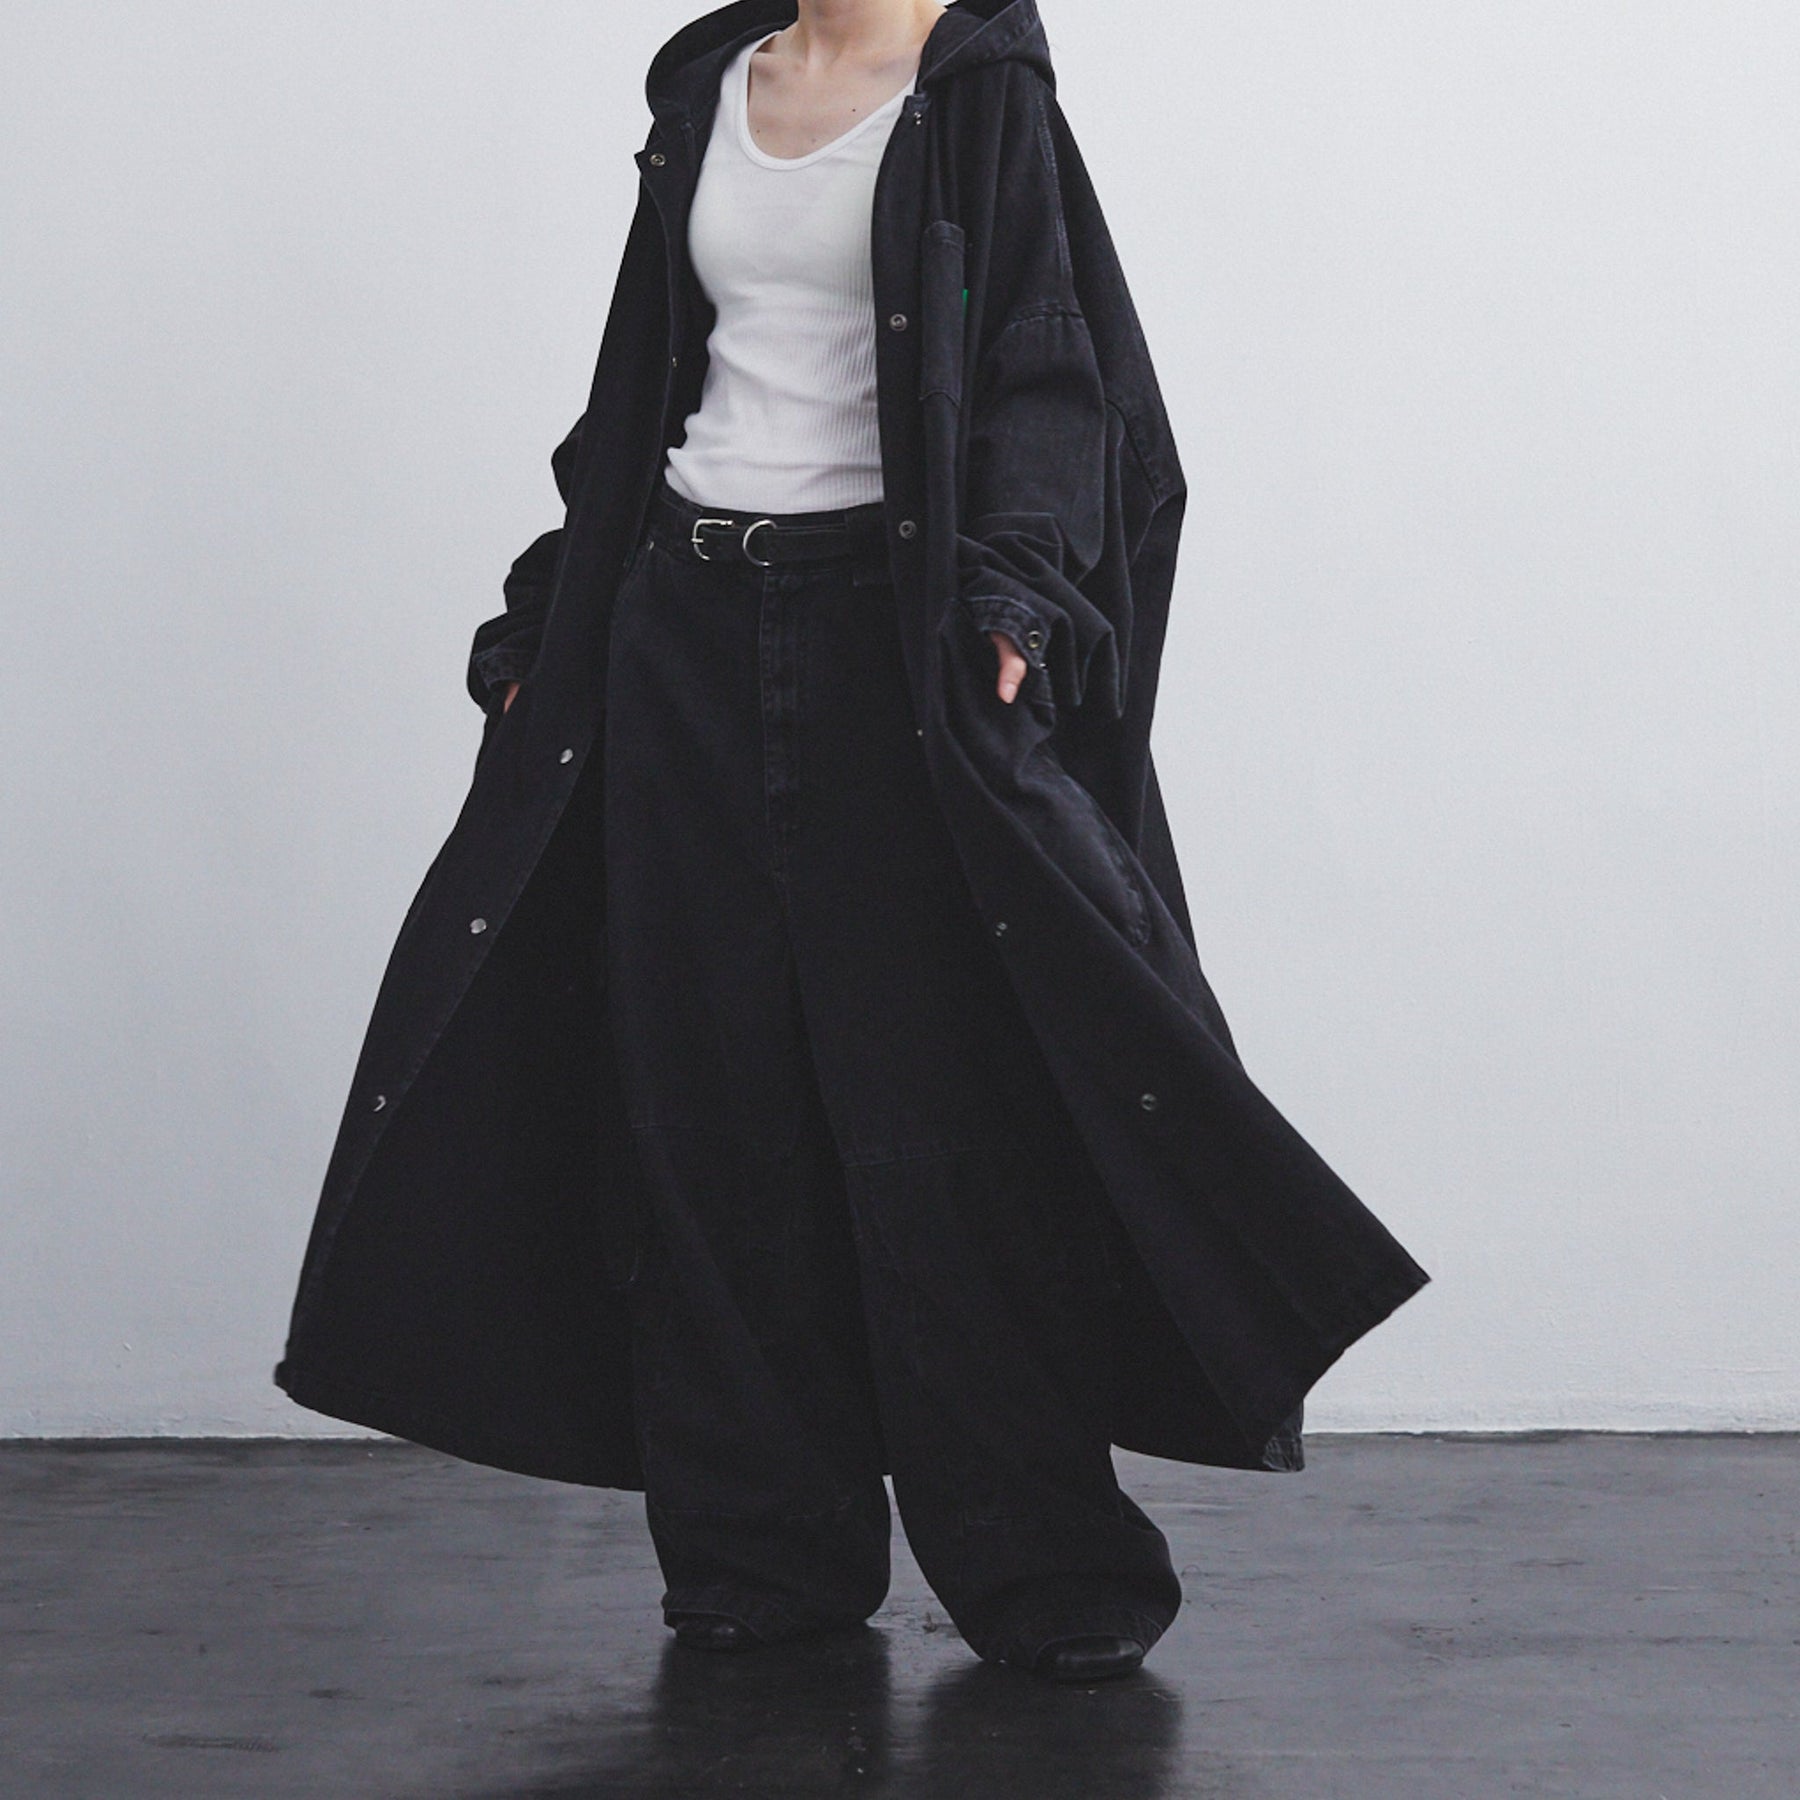 【CCTB Exclusive】WILLY CHAVARRIA / BIG DADDY HOODED COAT WASHED BLACK